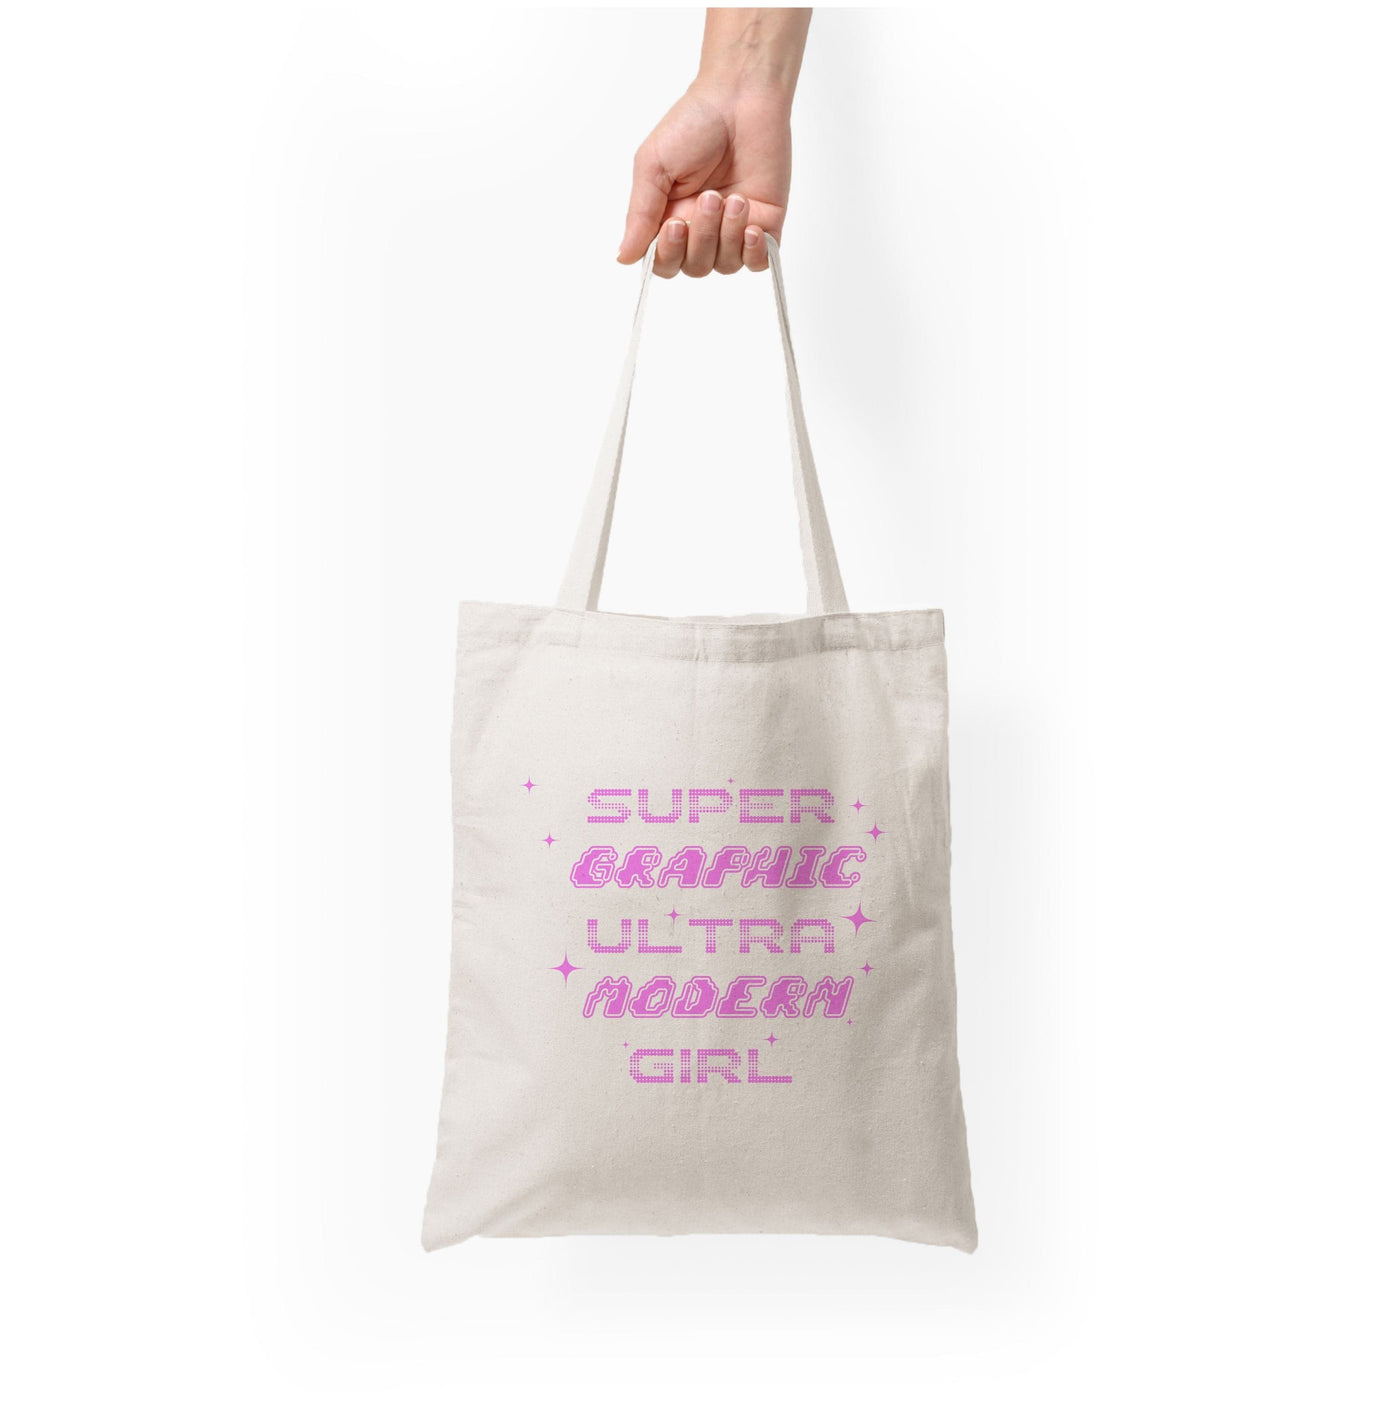 Super Graphic Ultra Modern Girl - Chappell Roan Tote Bag